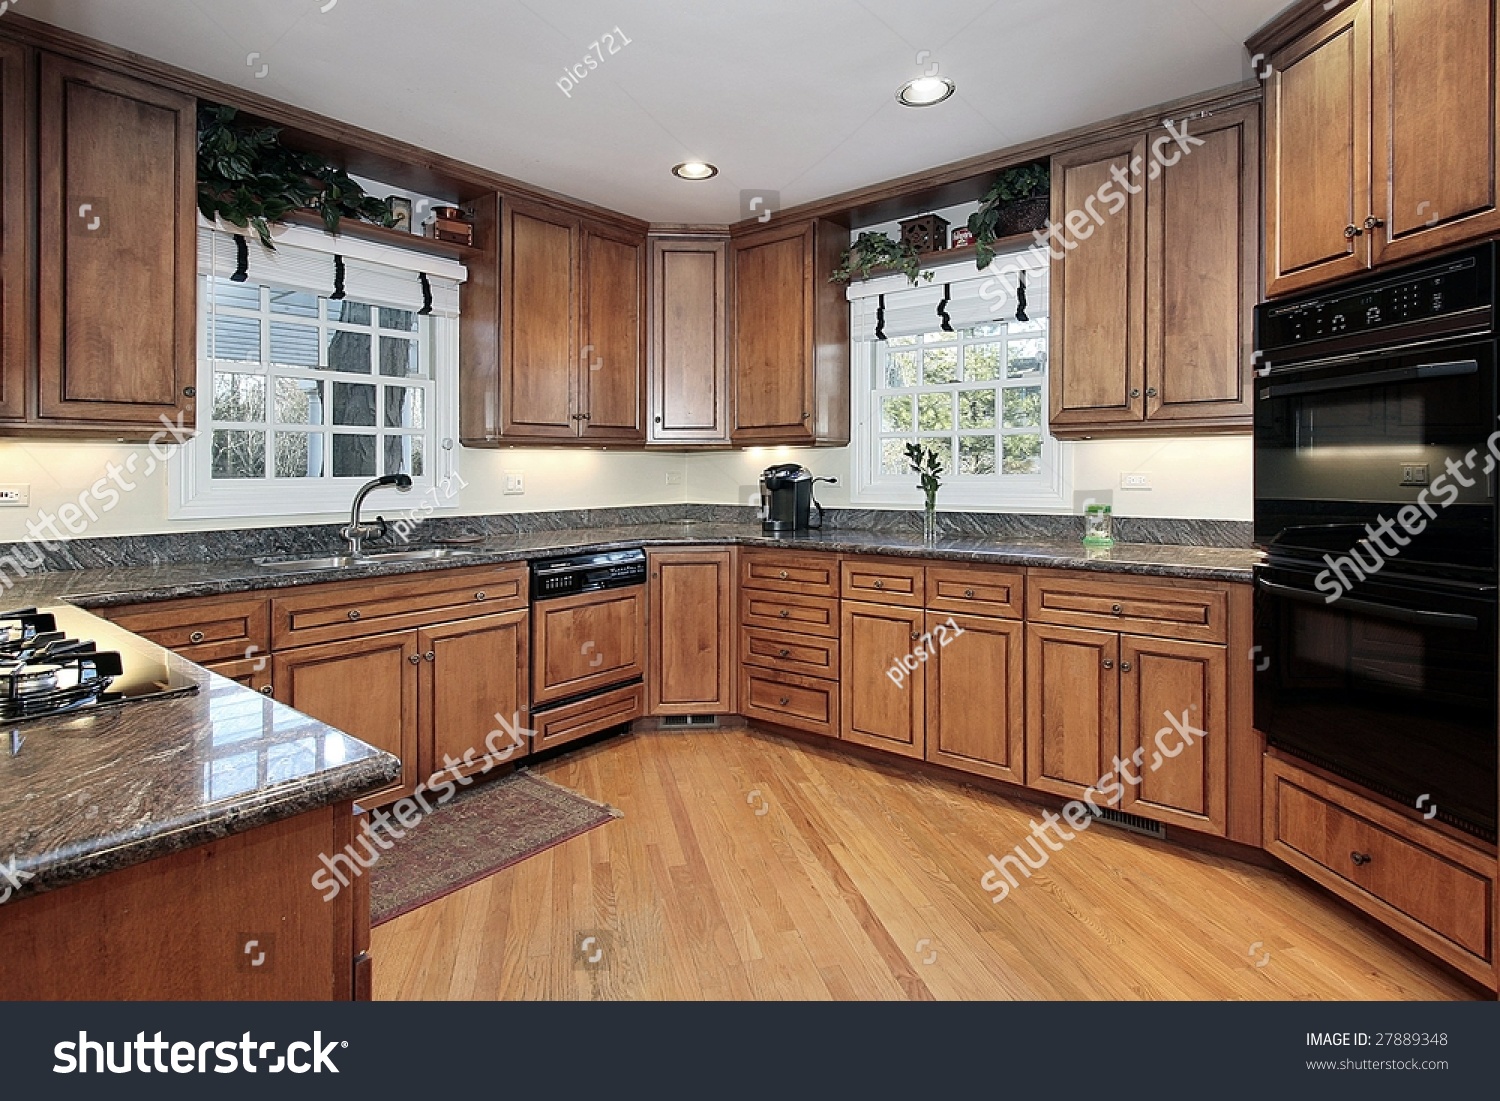 Kitchen Hickory Cabinets Stock Photo Edit Now 27889348